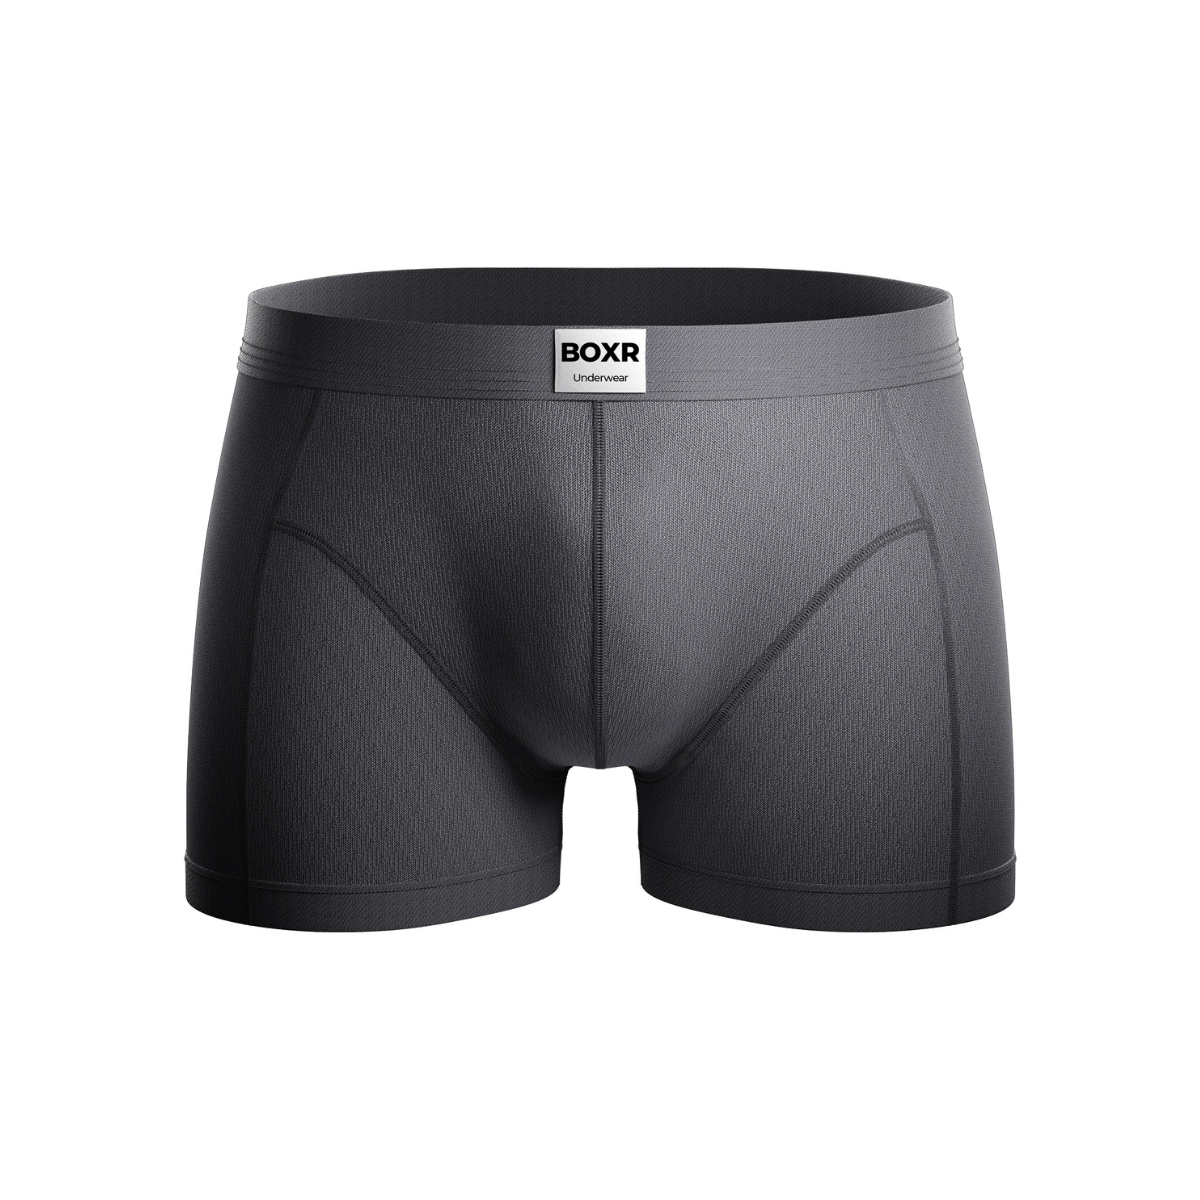 BOXR | The Classic Bamboo Boxers 2-Pack Gray